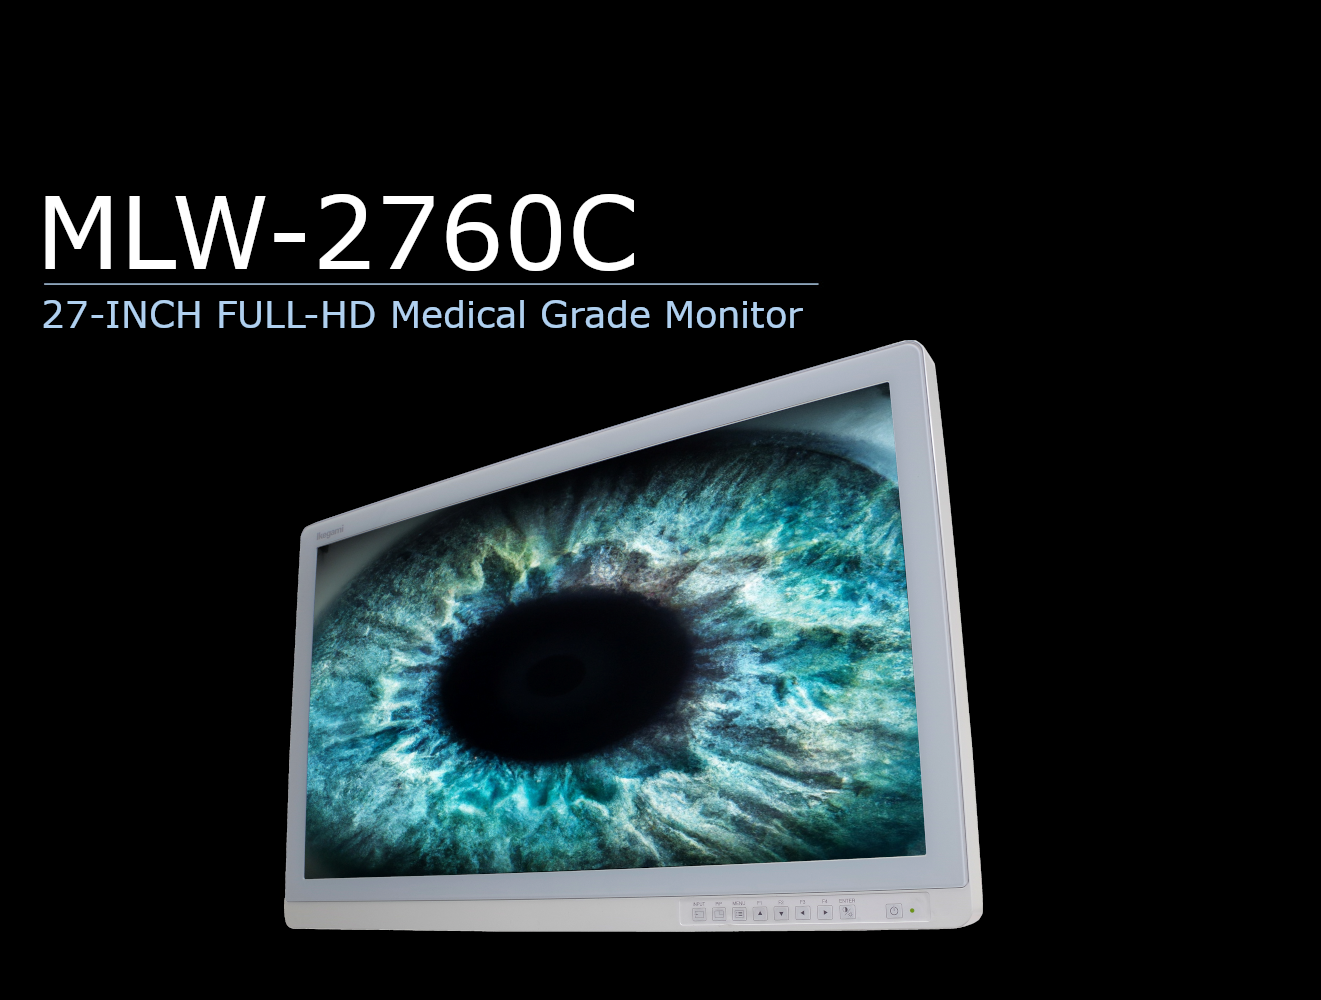 MLW-2760C